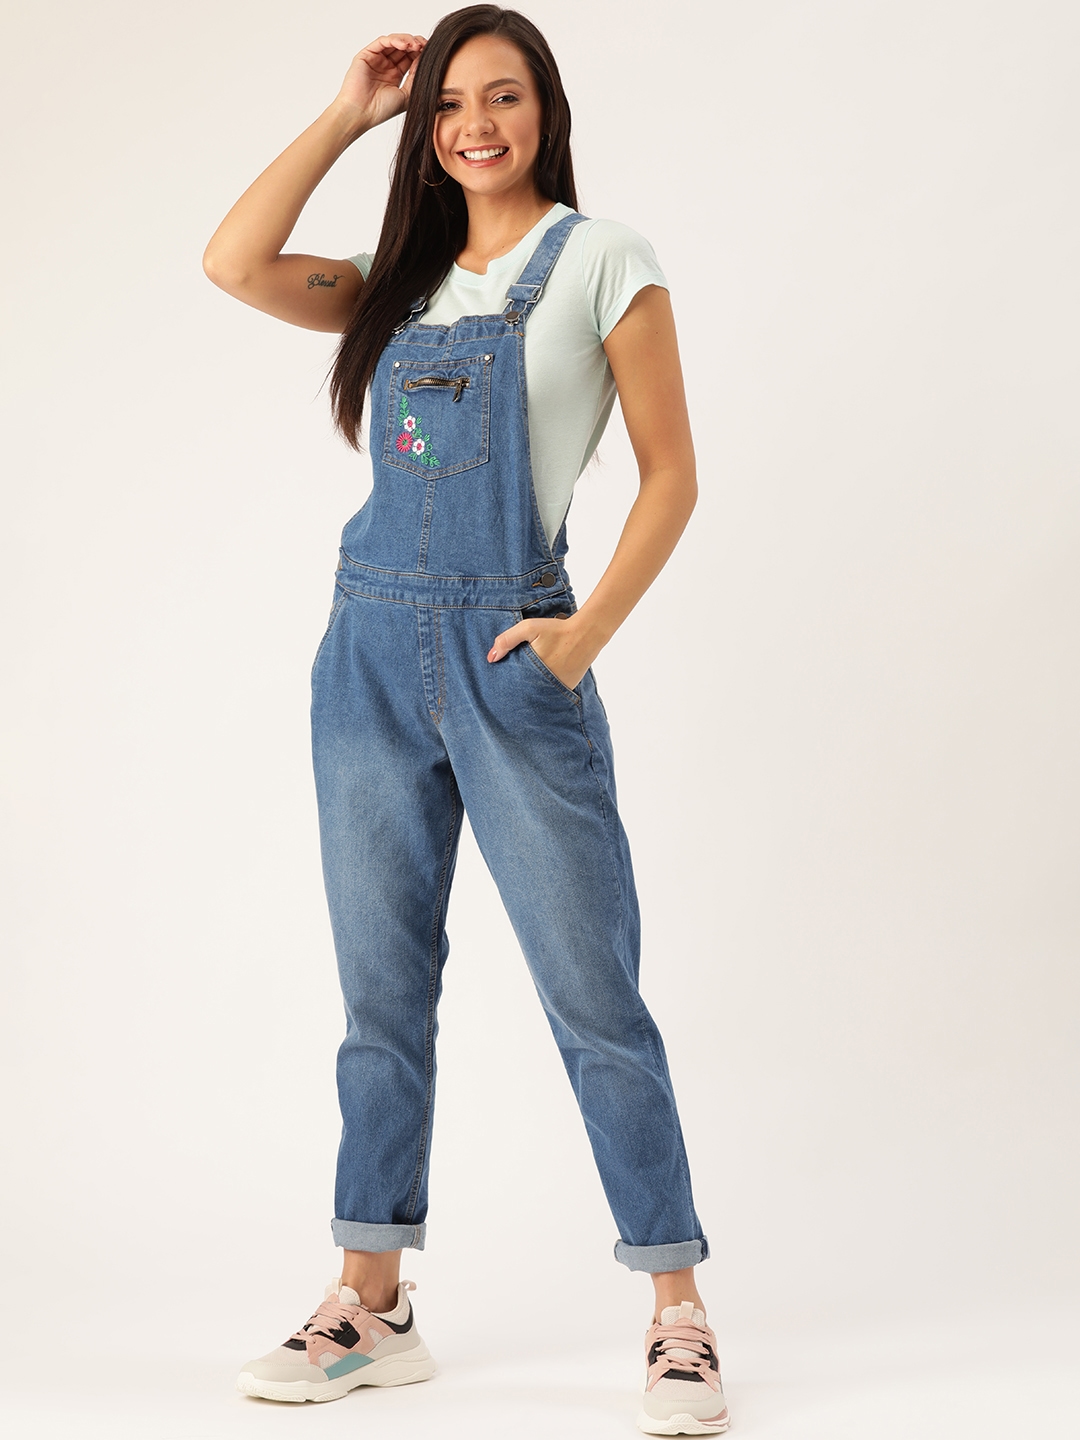 Collection more than 103 womens denim dungarees best